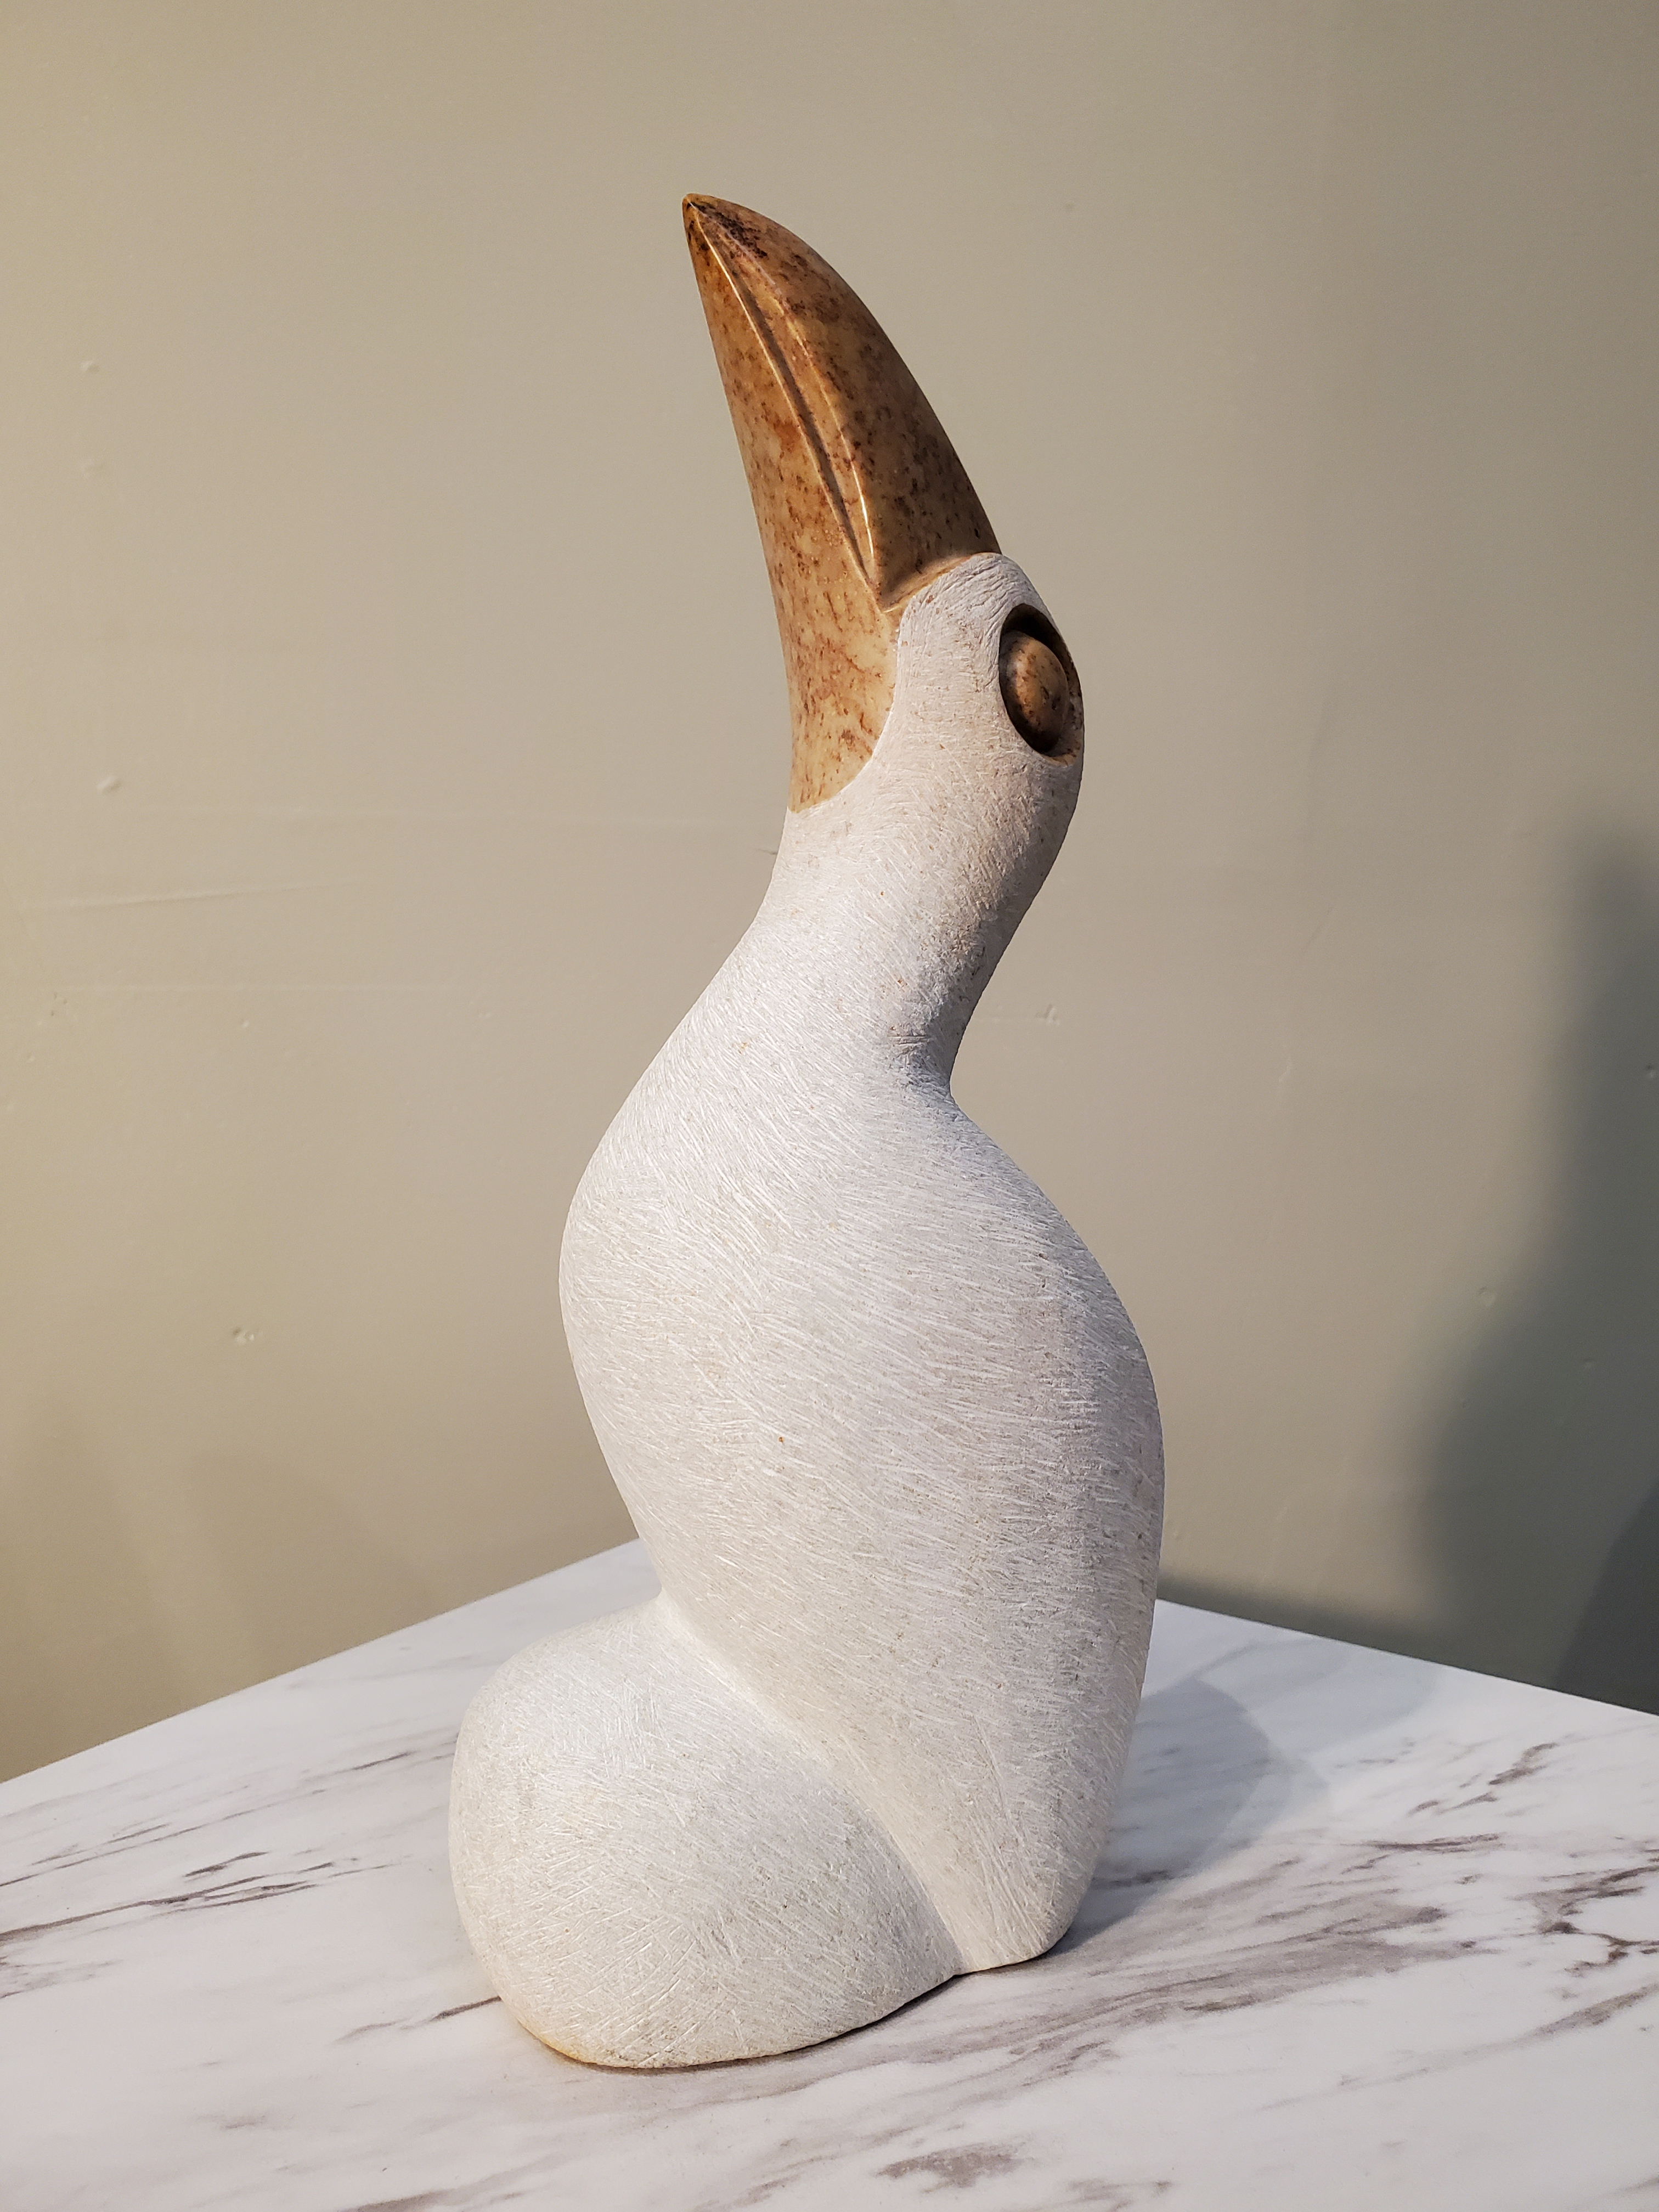 A beautiful perched white pelican looking inquisitively upward. This bird was sculpted from a single piece of opal stone. The white bird is accentuated by a bronze colored beak and eyes. Colors included: White, Bronze.